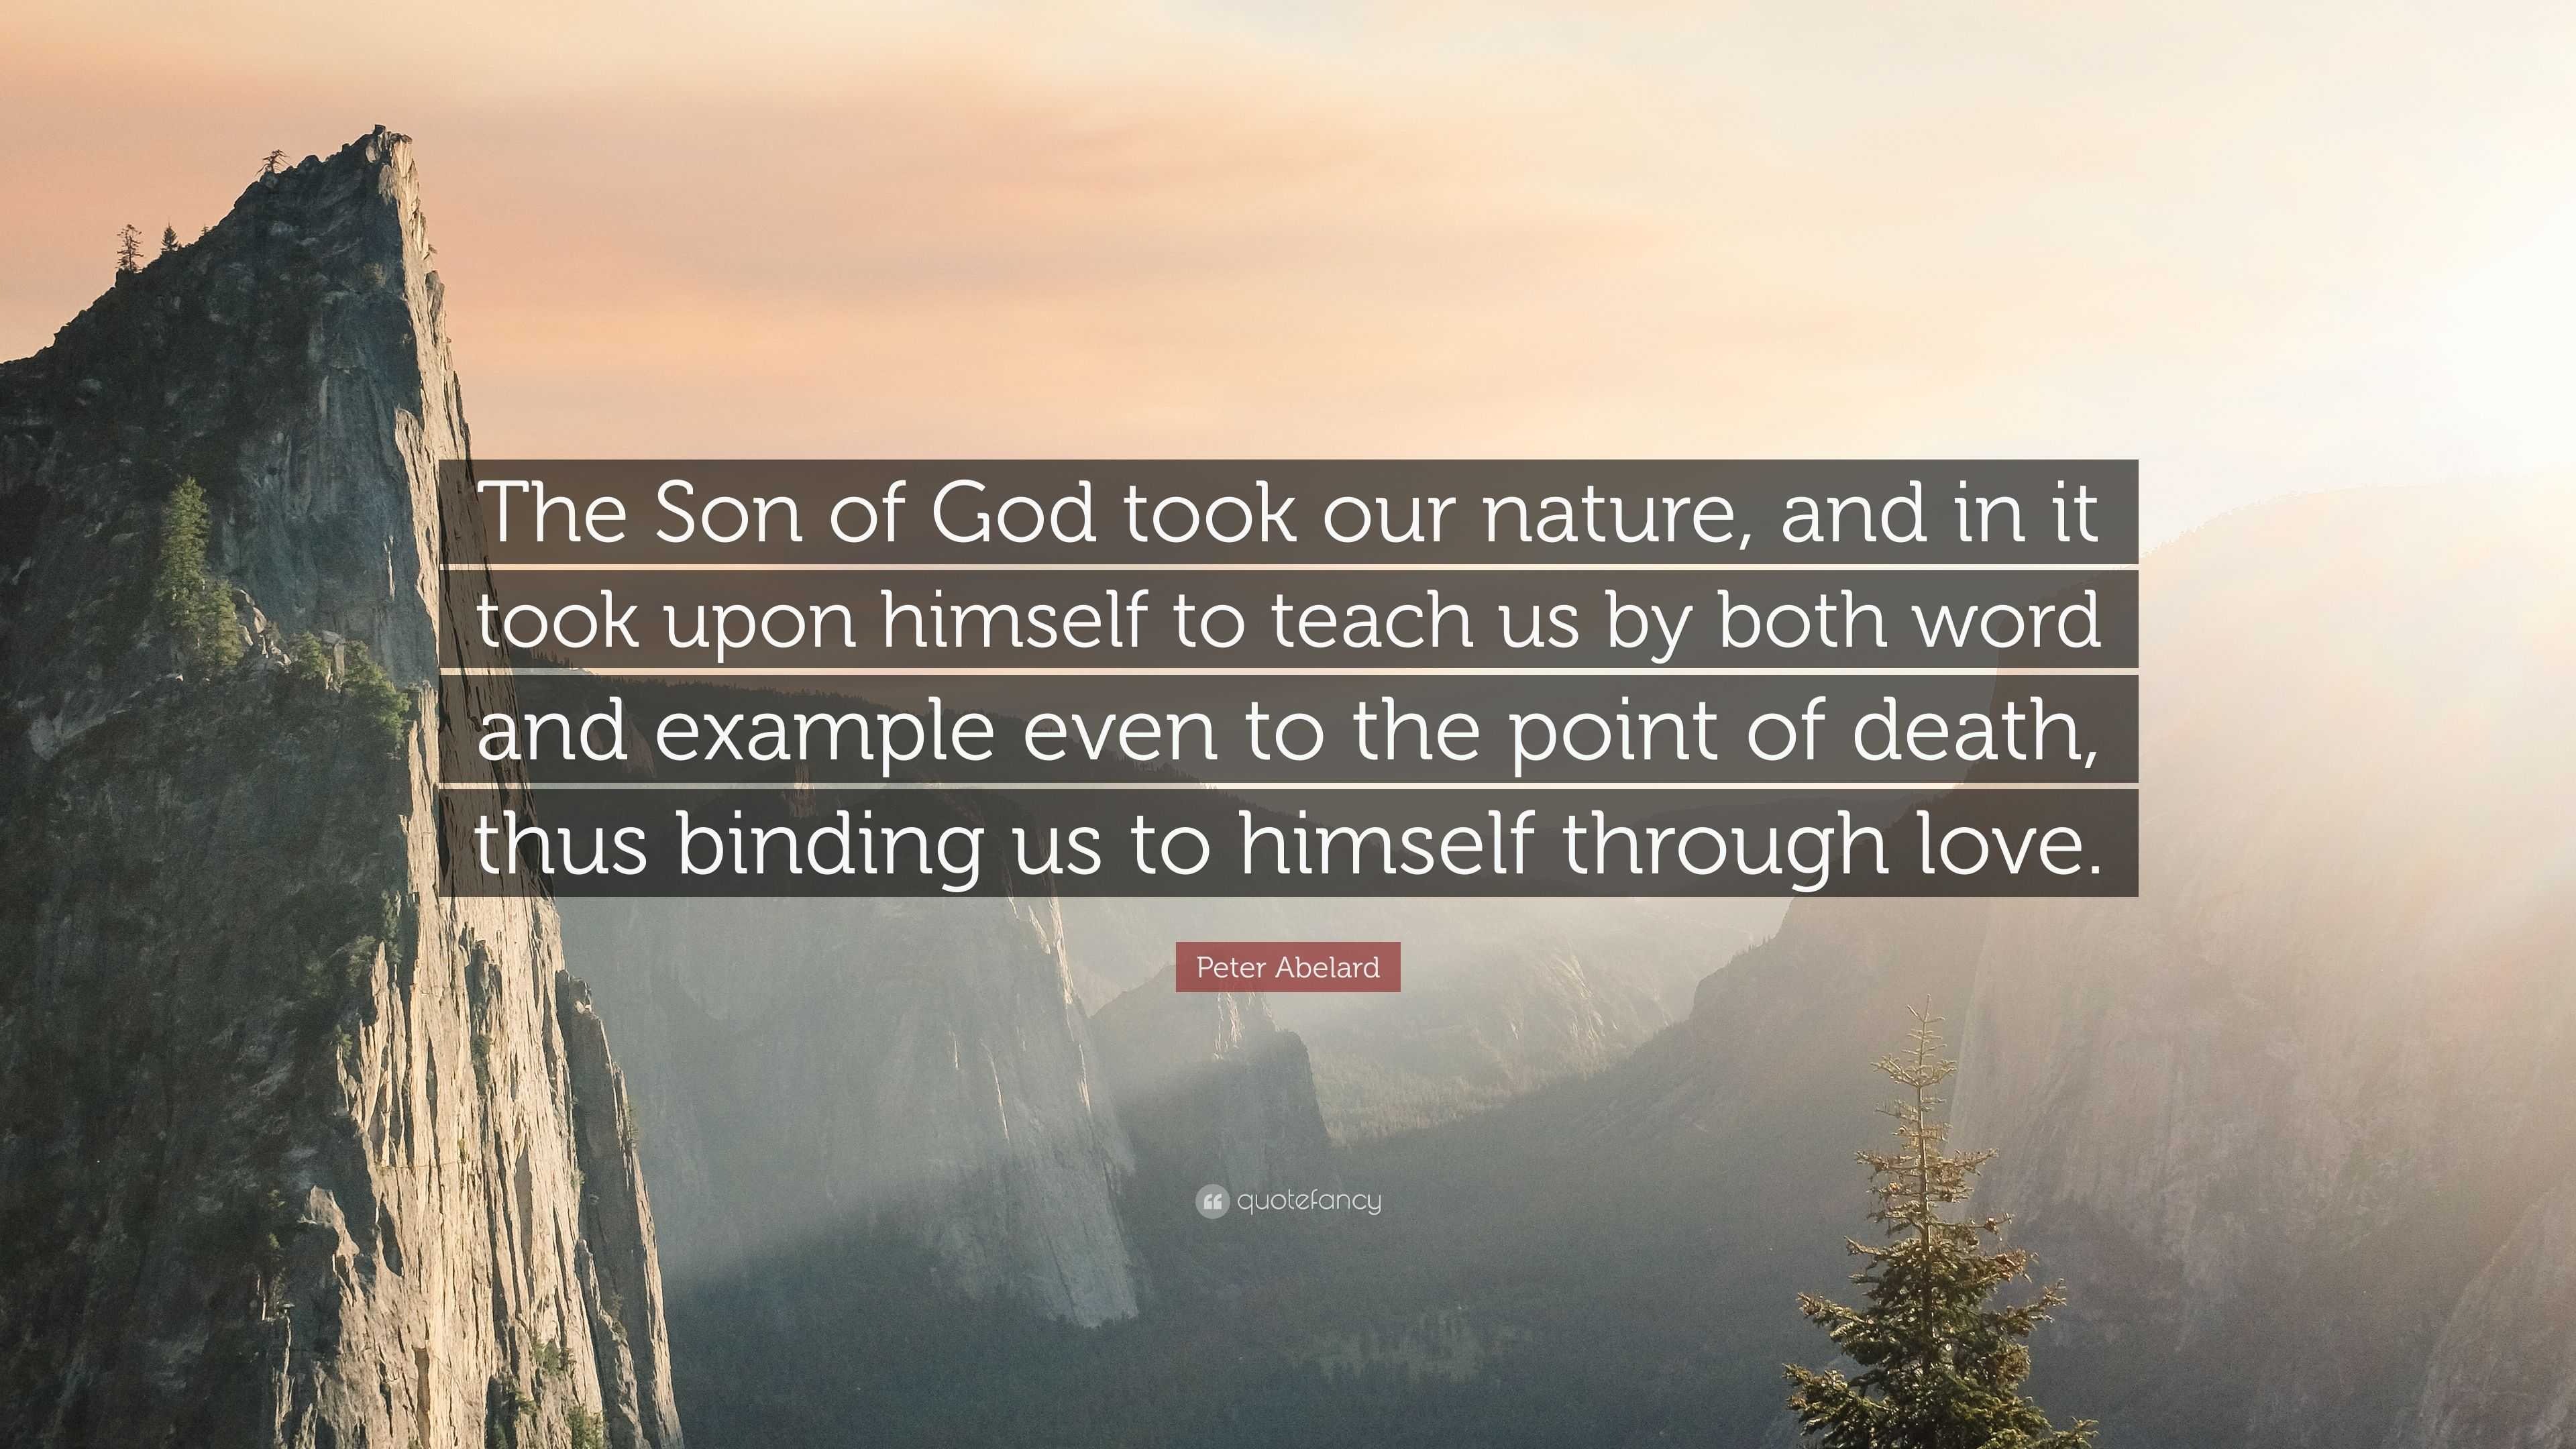 Peter Abelard Quote: “The Son God took our nature, and in it took upon himself to teach us by both word and example even to the point of de...”